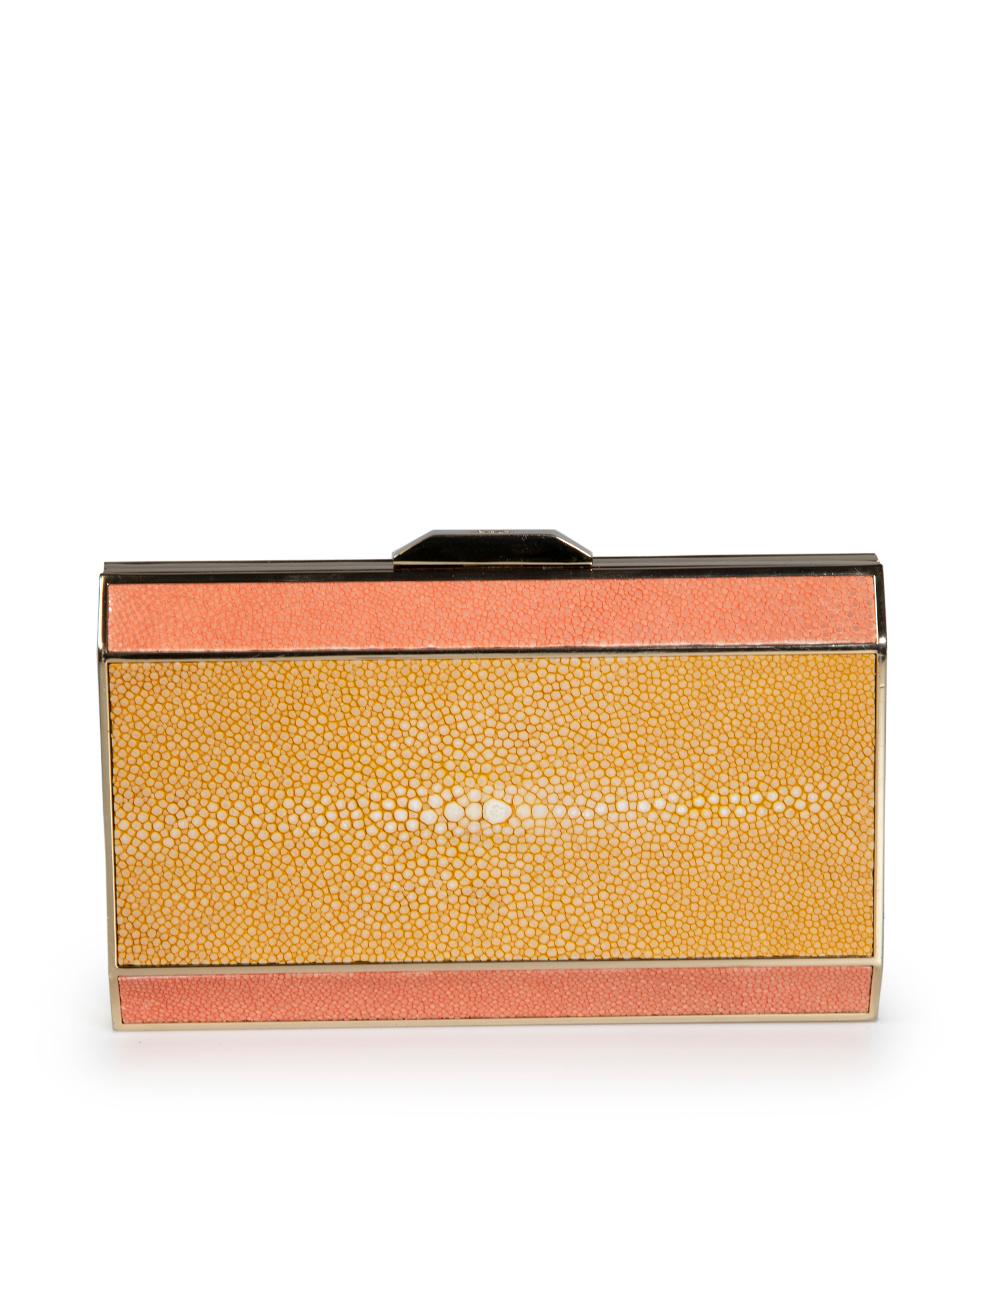 Anya Hindmarch Yellow Stingray Metal Box Clutch In Excellent Condition For Sale In London, GB